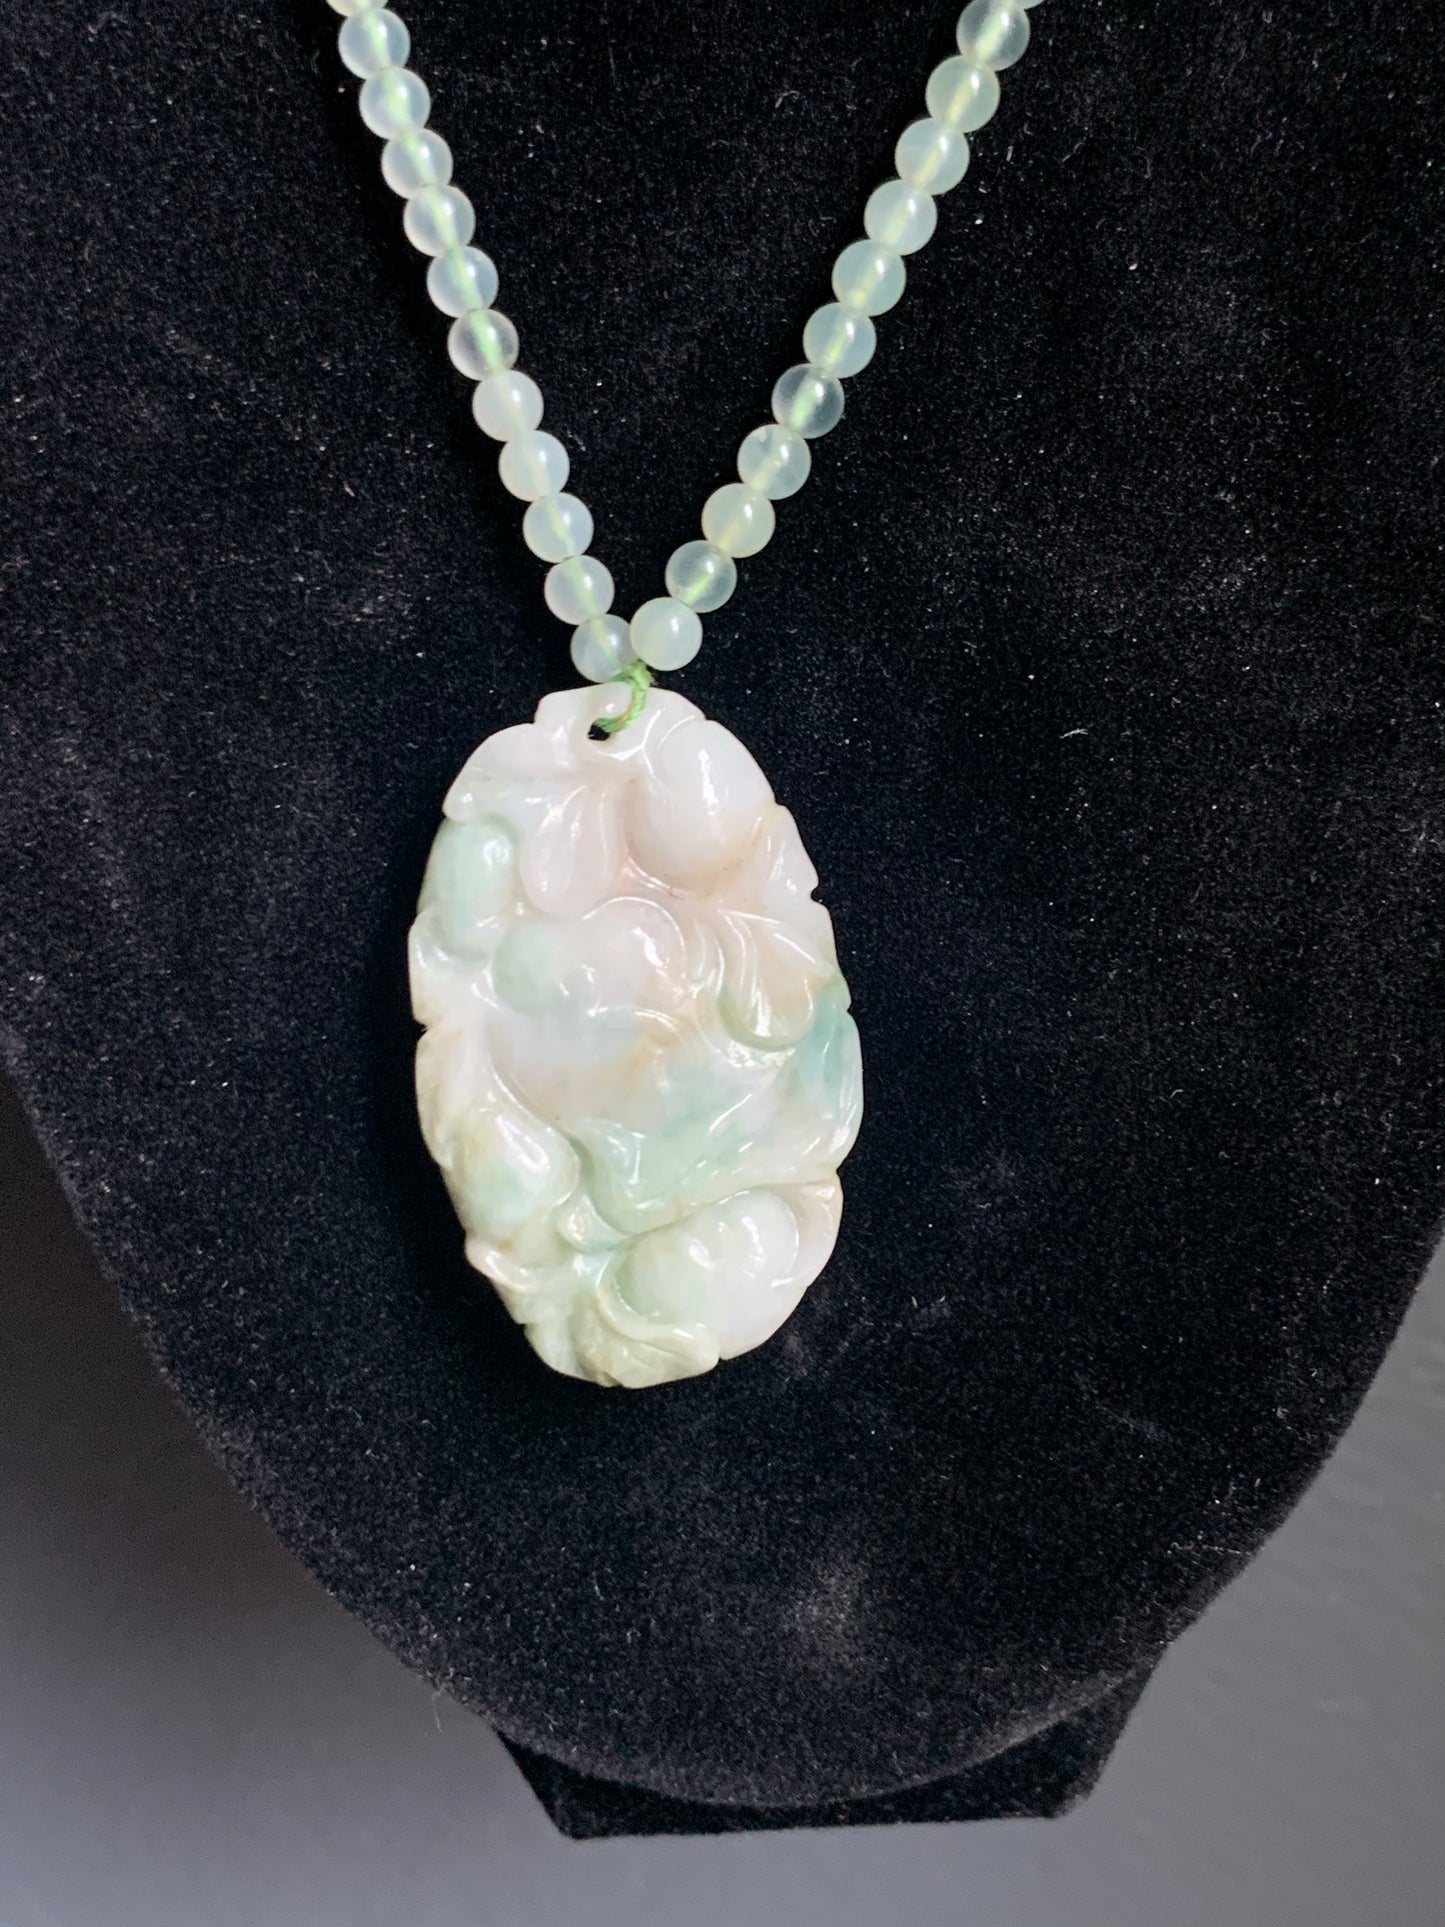 A jade necklace and pendant